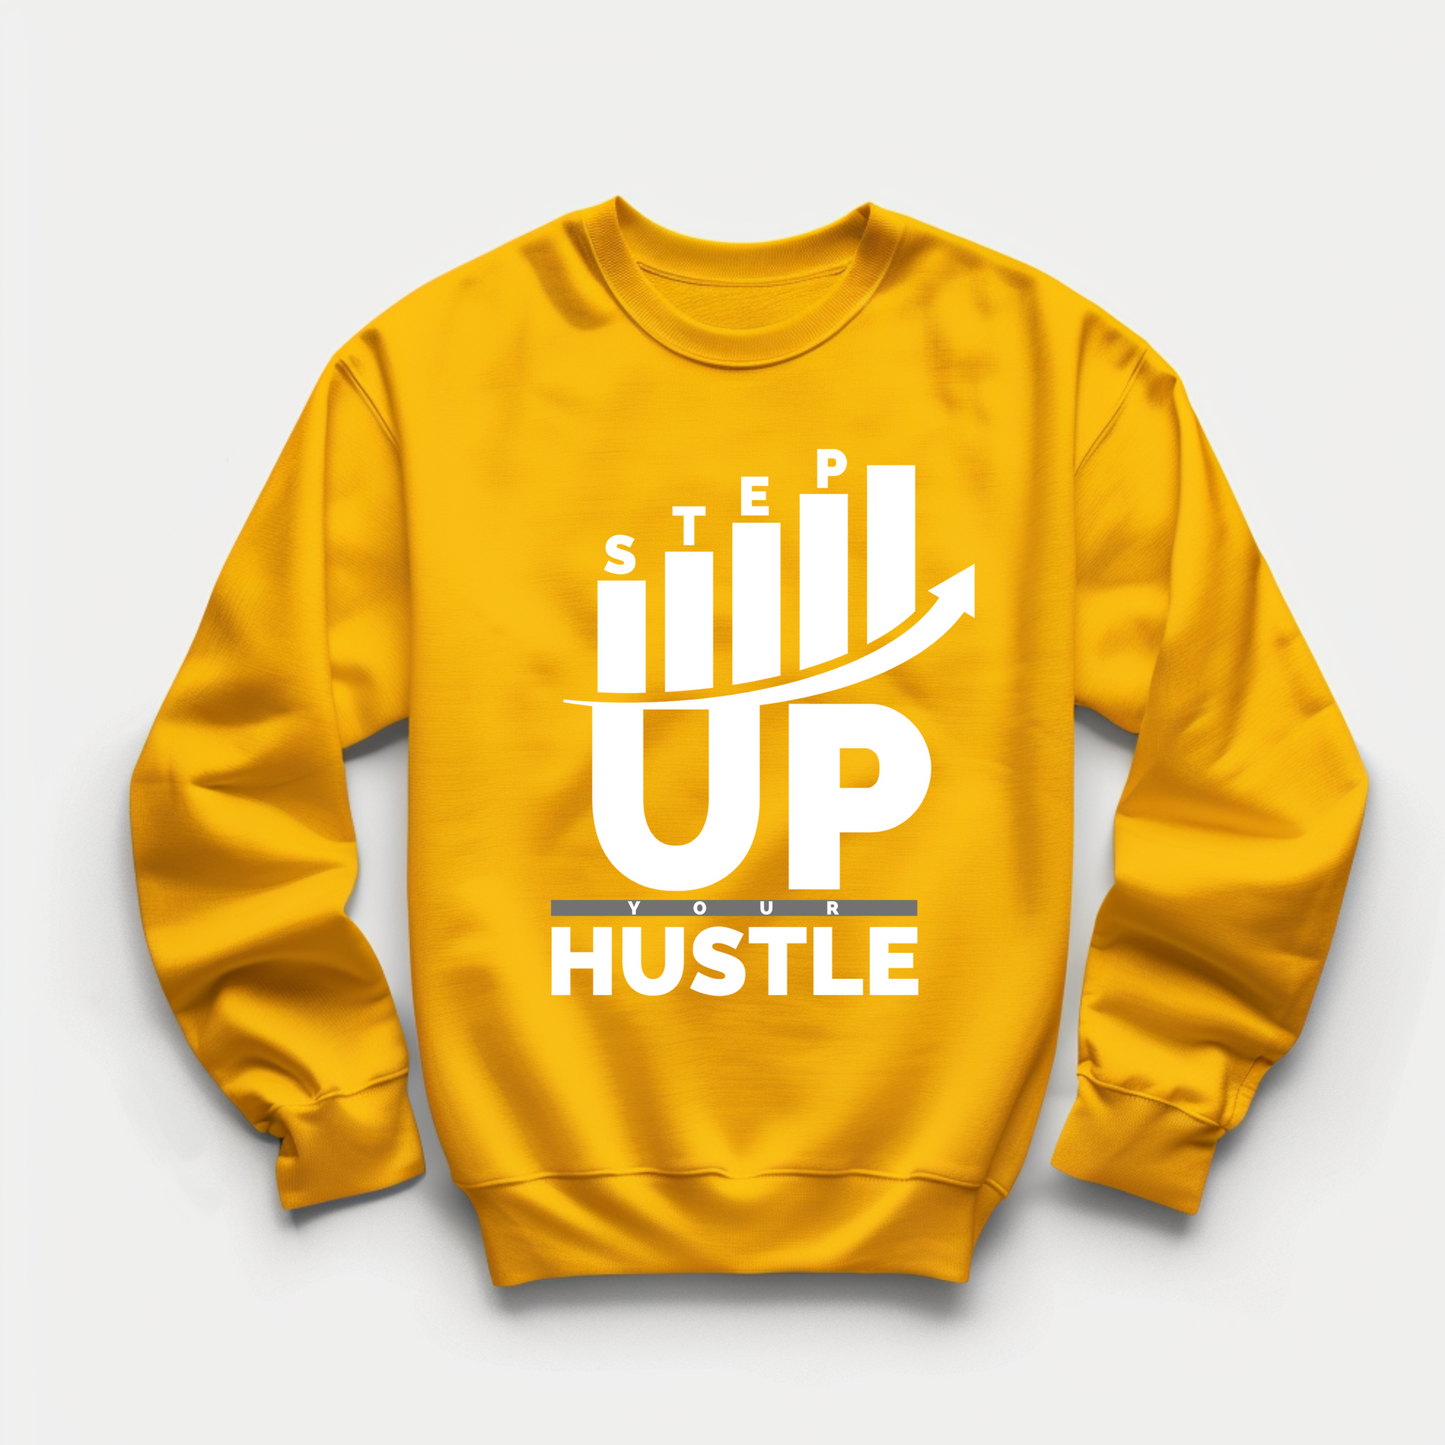 Step Up Your Hustle - Sweat Shirt